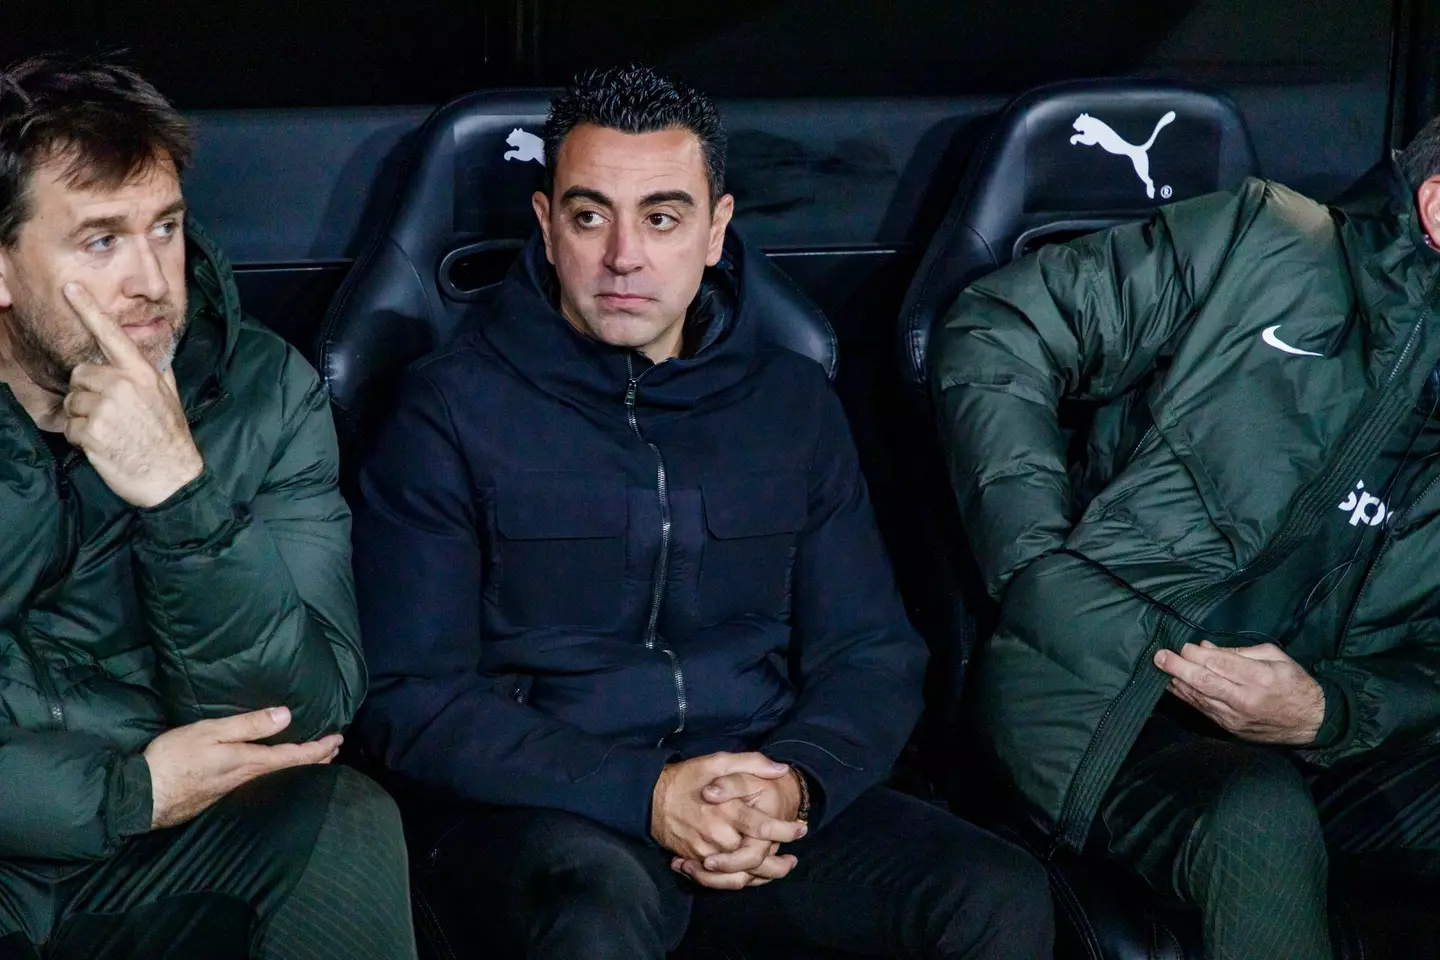 Barcelona are reportedly keen on one of Xavi's former teammates as his successor if he moves on. (